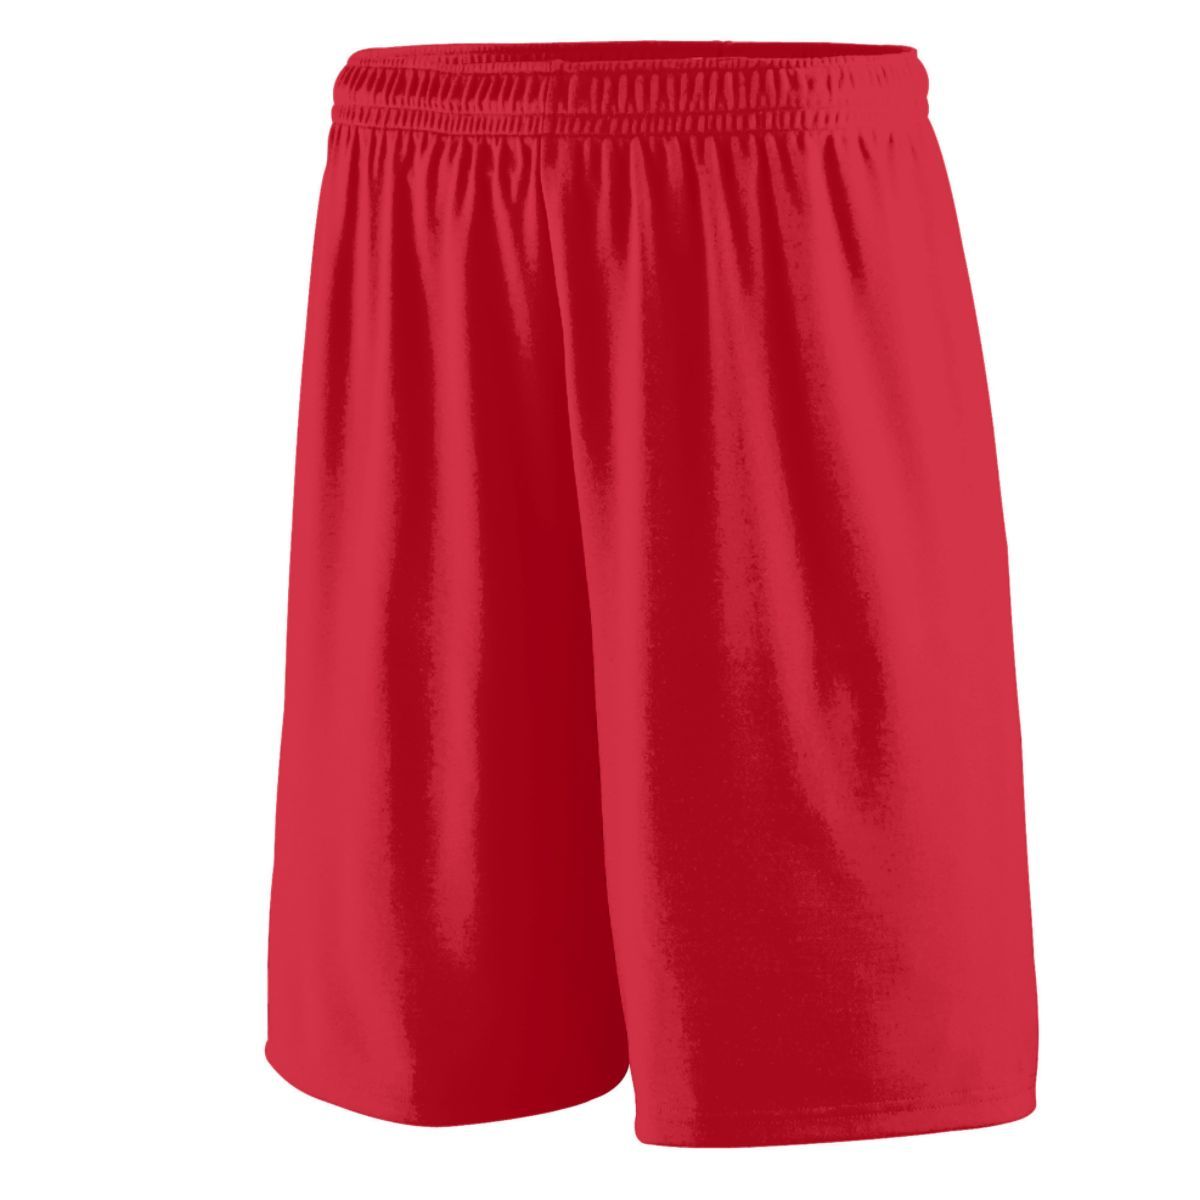 Augusta Sportswear Training Shorts in Red  -Part of the Adult, Adult-Shorts, Augusta-Products product lines at KanaleyCreations.com